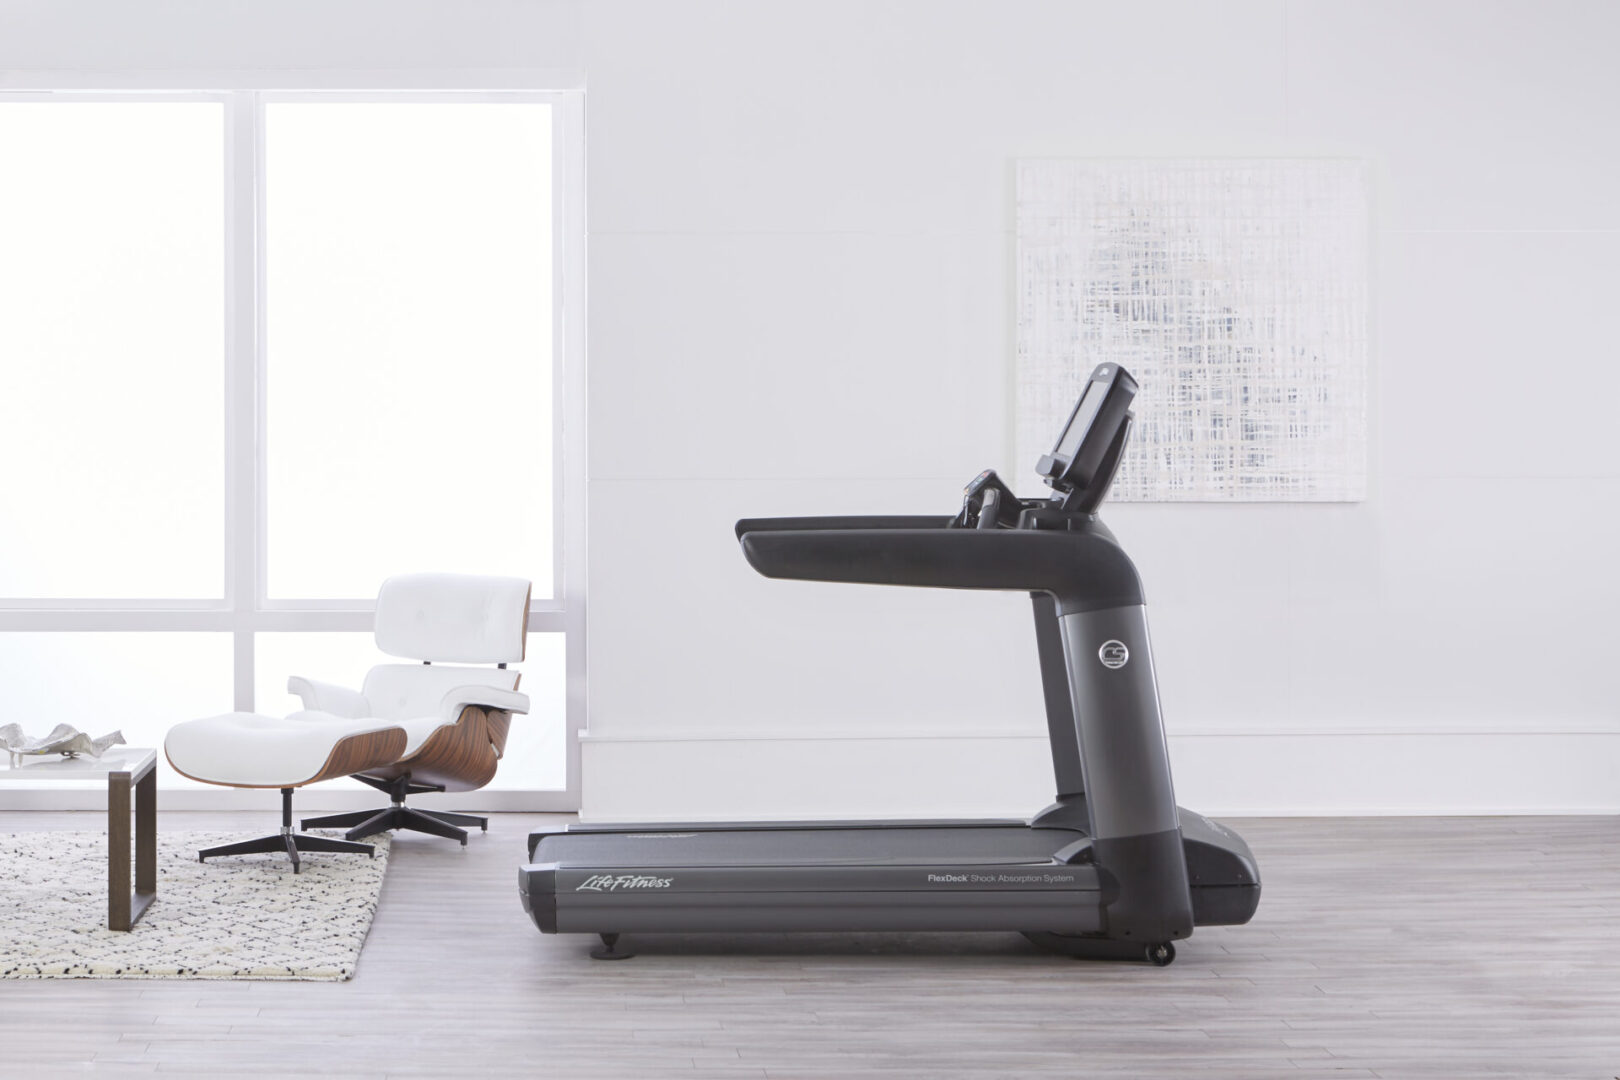 Treadmill-in-Room-sideview